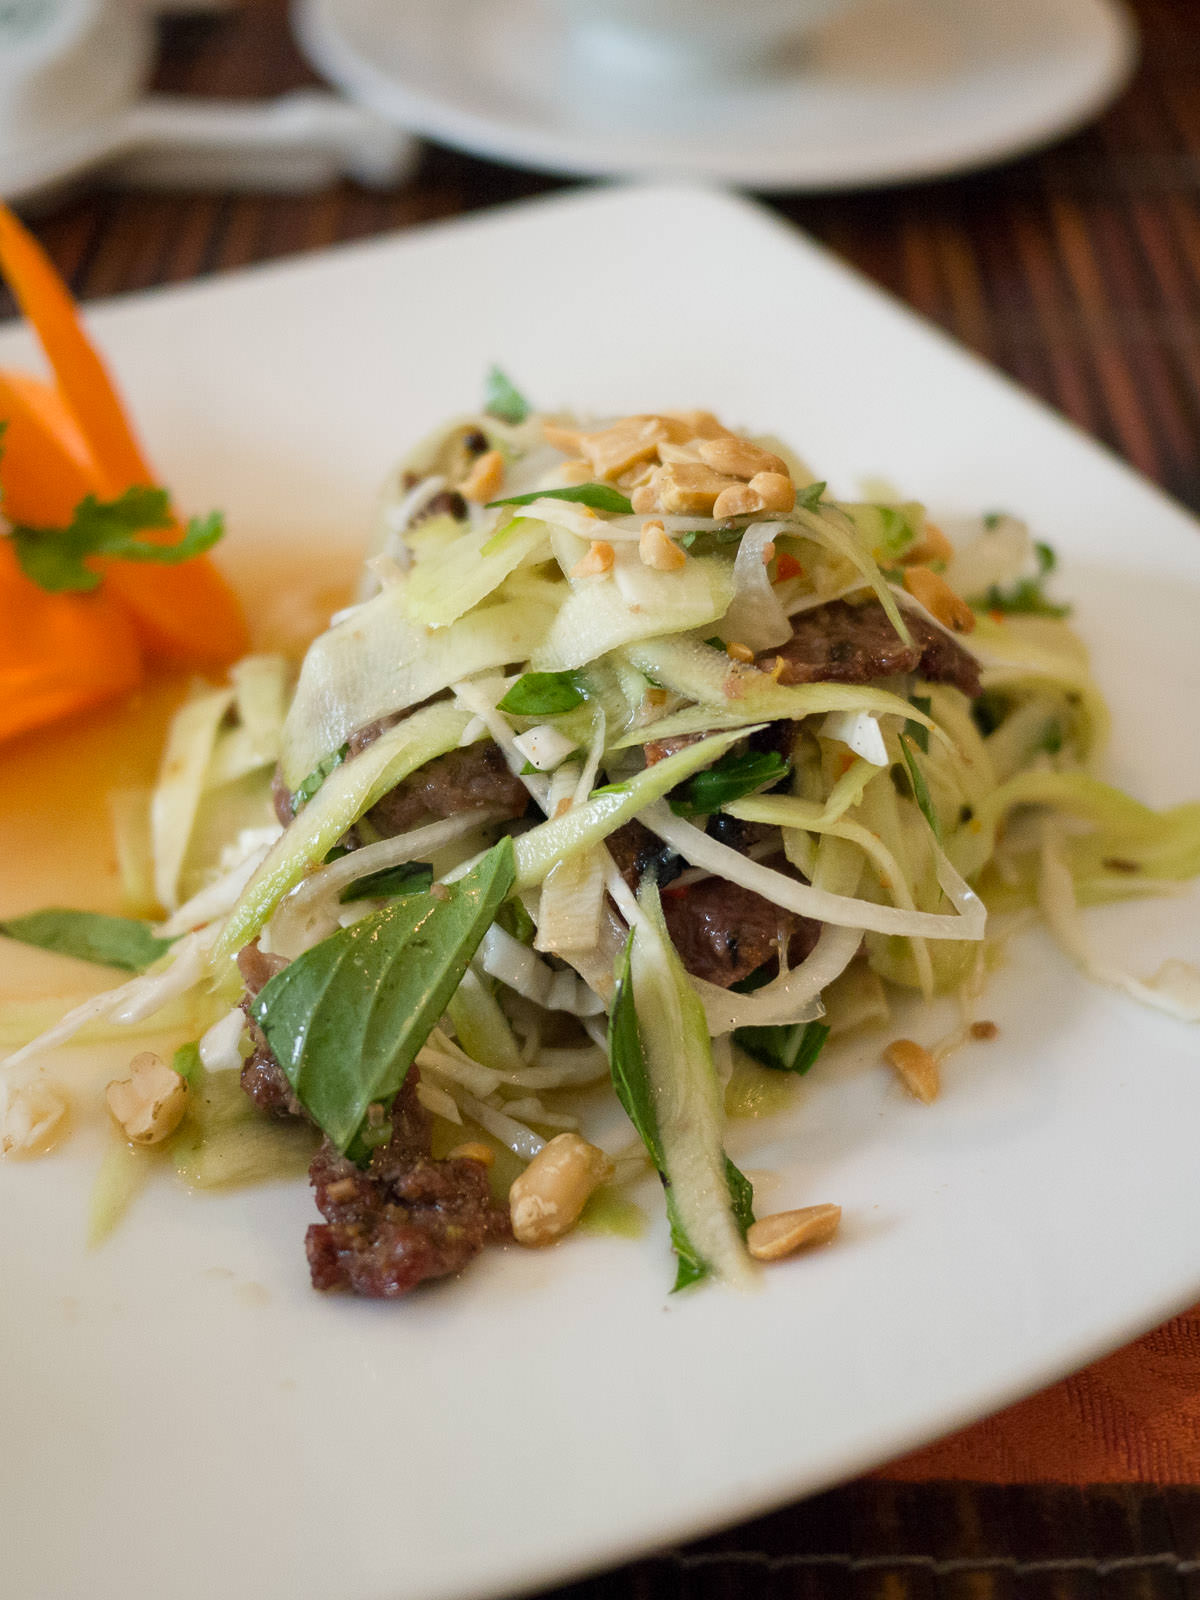 Mango salad with grilled beef